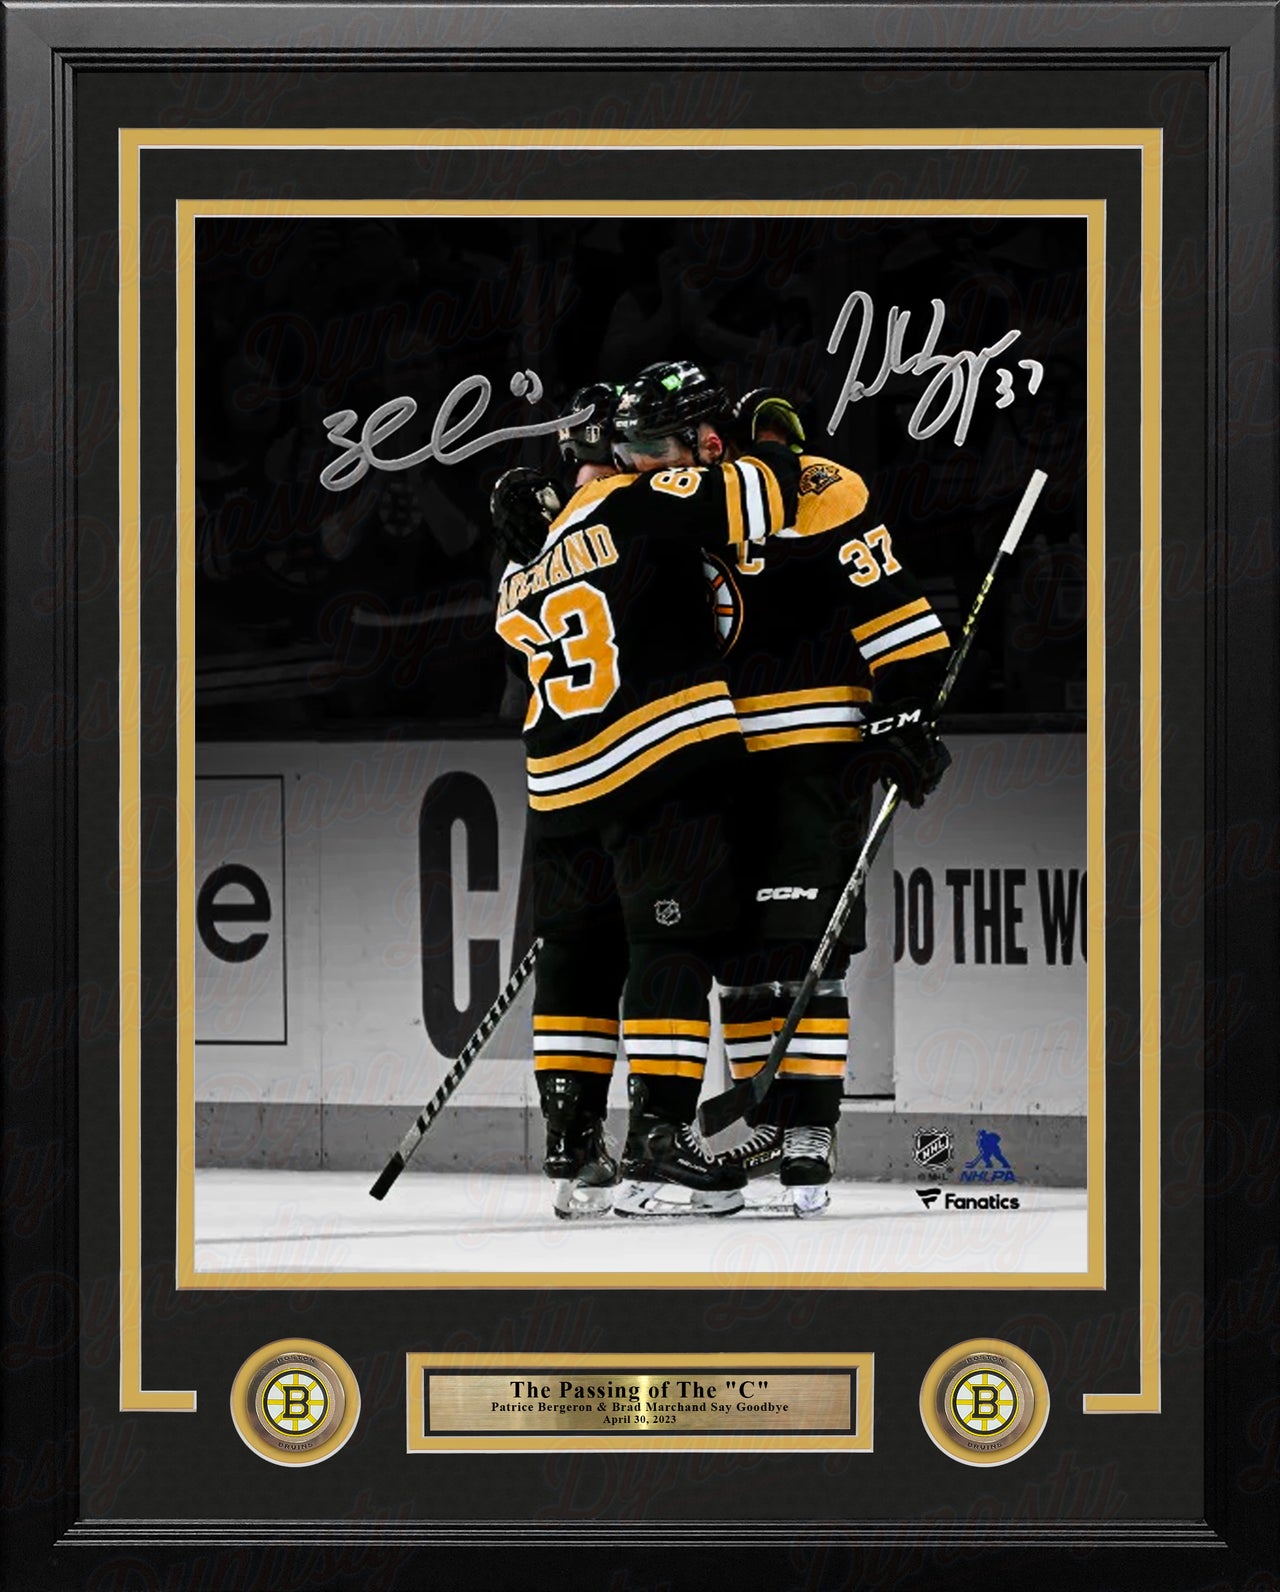 Patrice Bergeron & Brad Marchand Final Game Hug Boston Bruins Autographed 11" x 14" Framed Photo